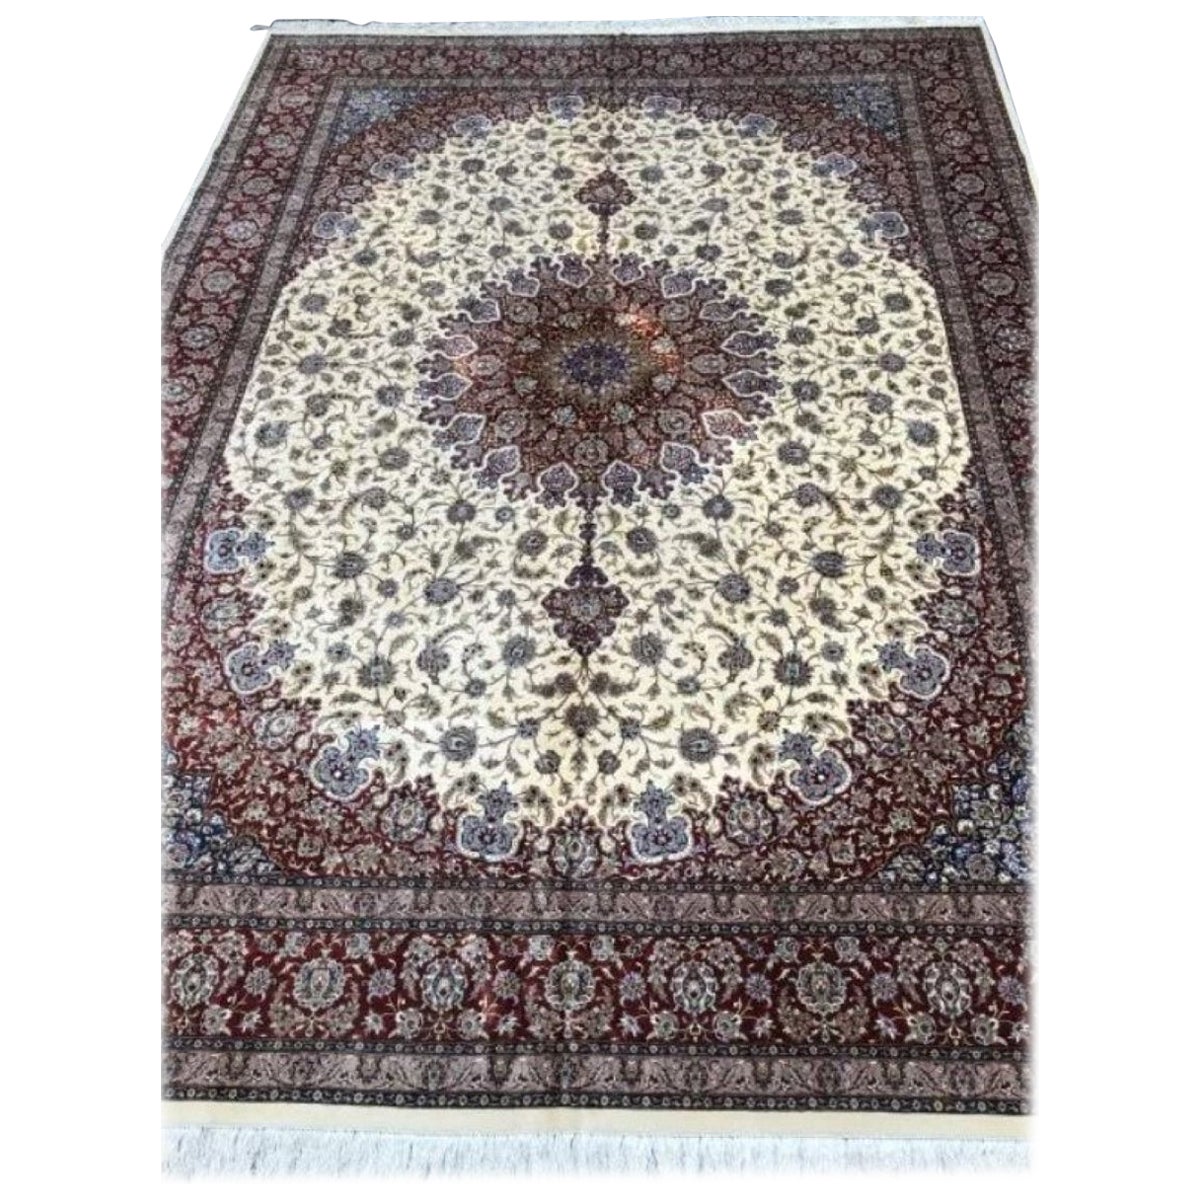 Magnificent Persian pure silk Qum with silk foundation. This rug has approximately 700 knots per sq inch with a total of 13,000,000 knots tied by hand one by one. It took 7 years to complete this beautiful piece of art.